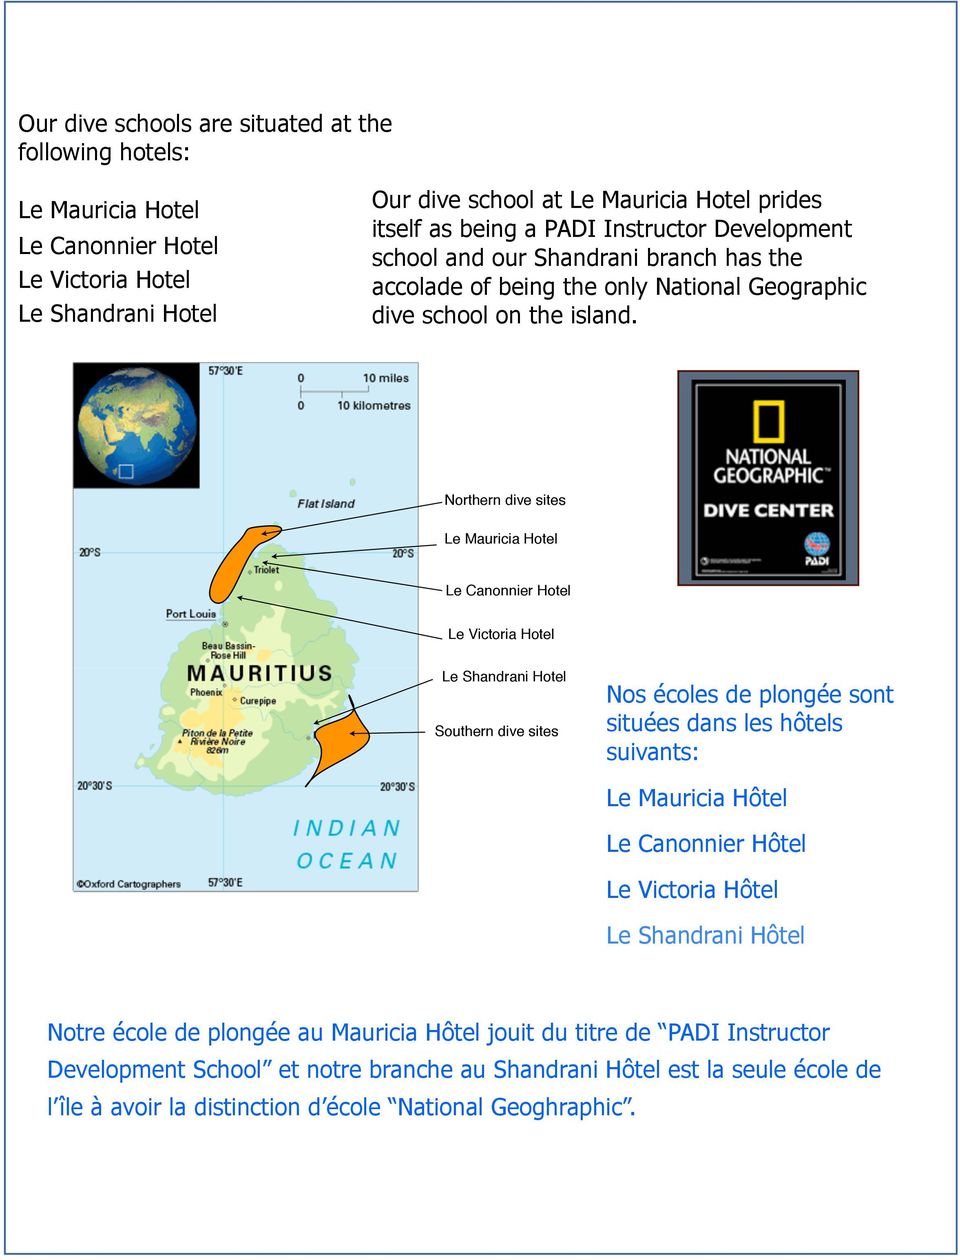 Northern dive sites Le Mauricia Hotel $.